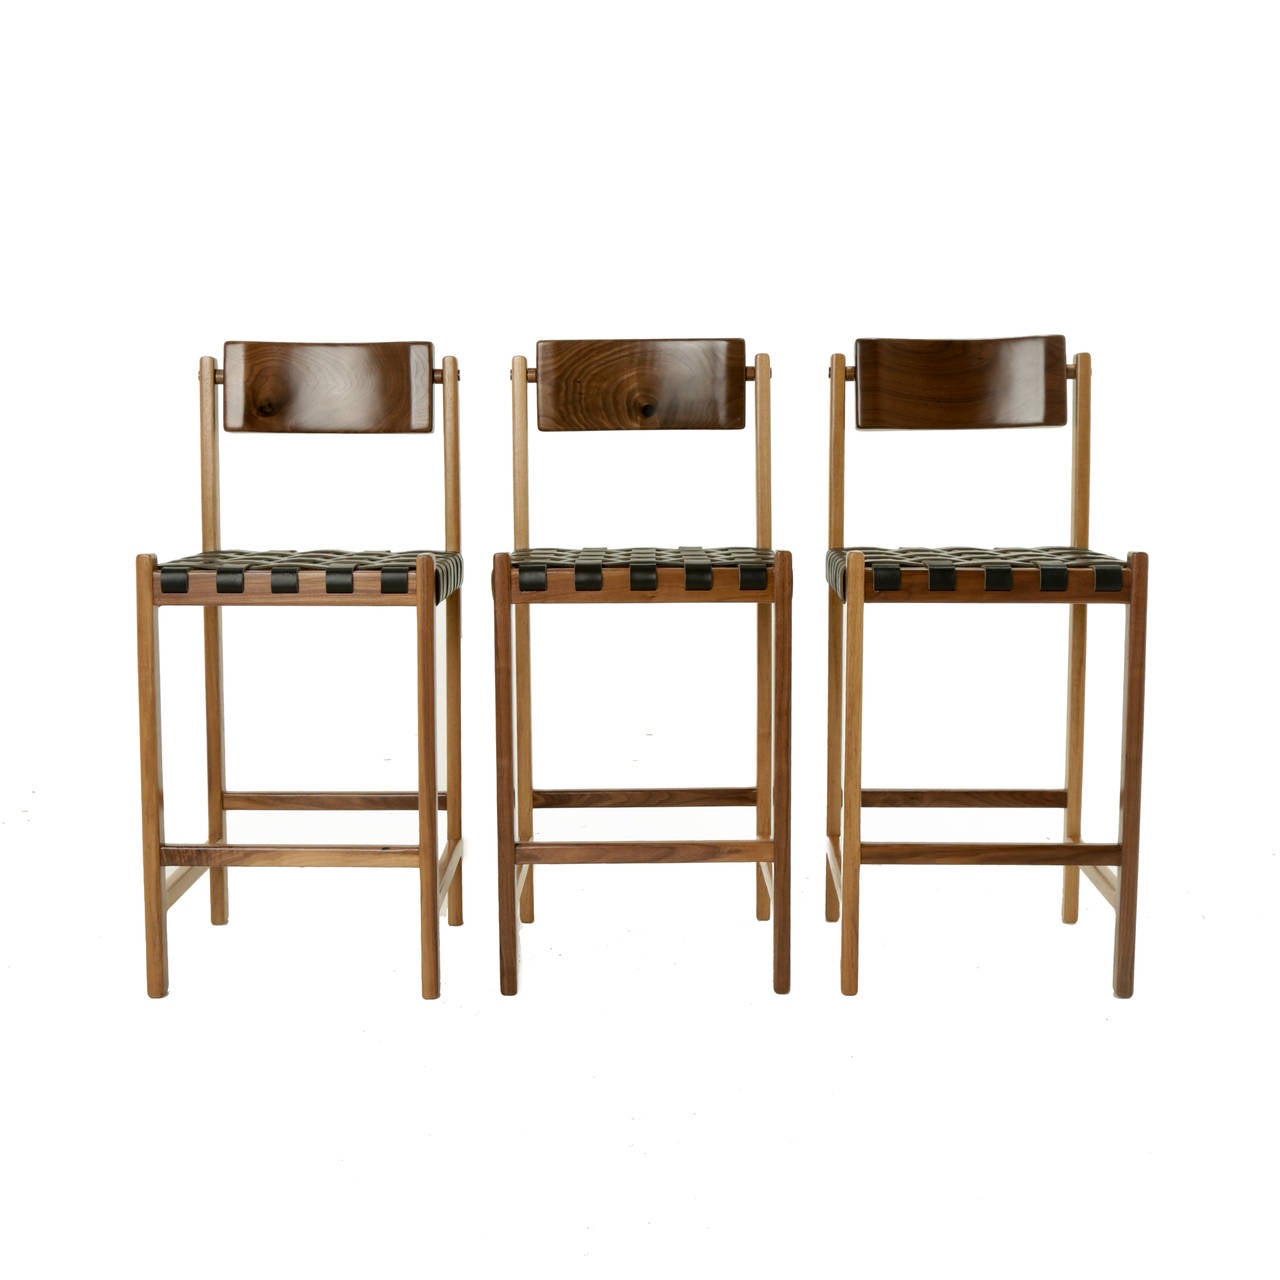 A sturdy solid walnut bar stool with a seat of woven leather straps and back of carved solid walnut that pivots for ultimate comfort. The frame has polished brass details on the sides.

Available for custom order and the lead time is 8-12 weeks;